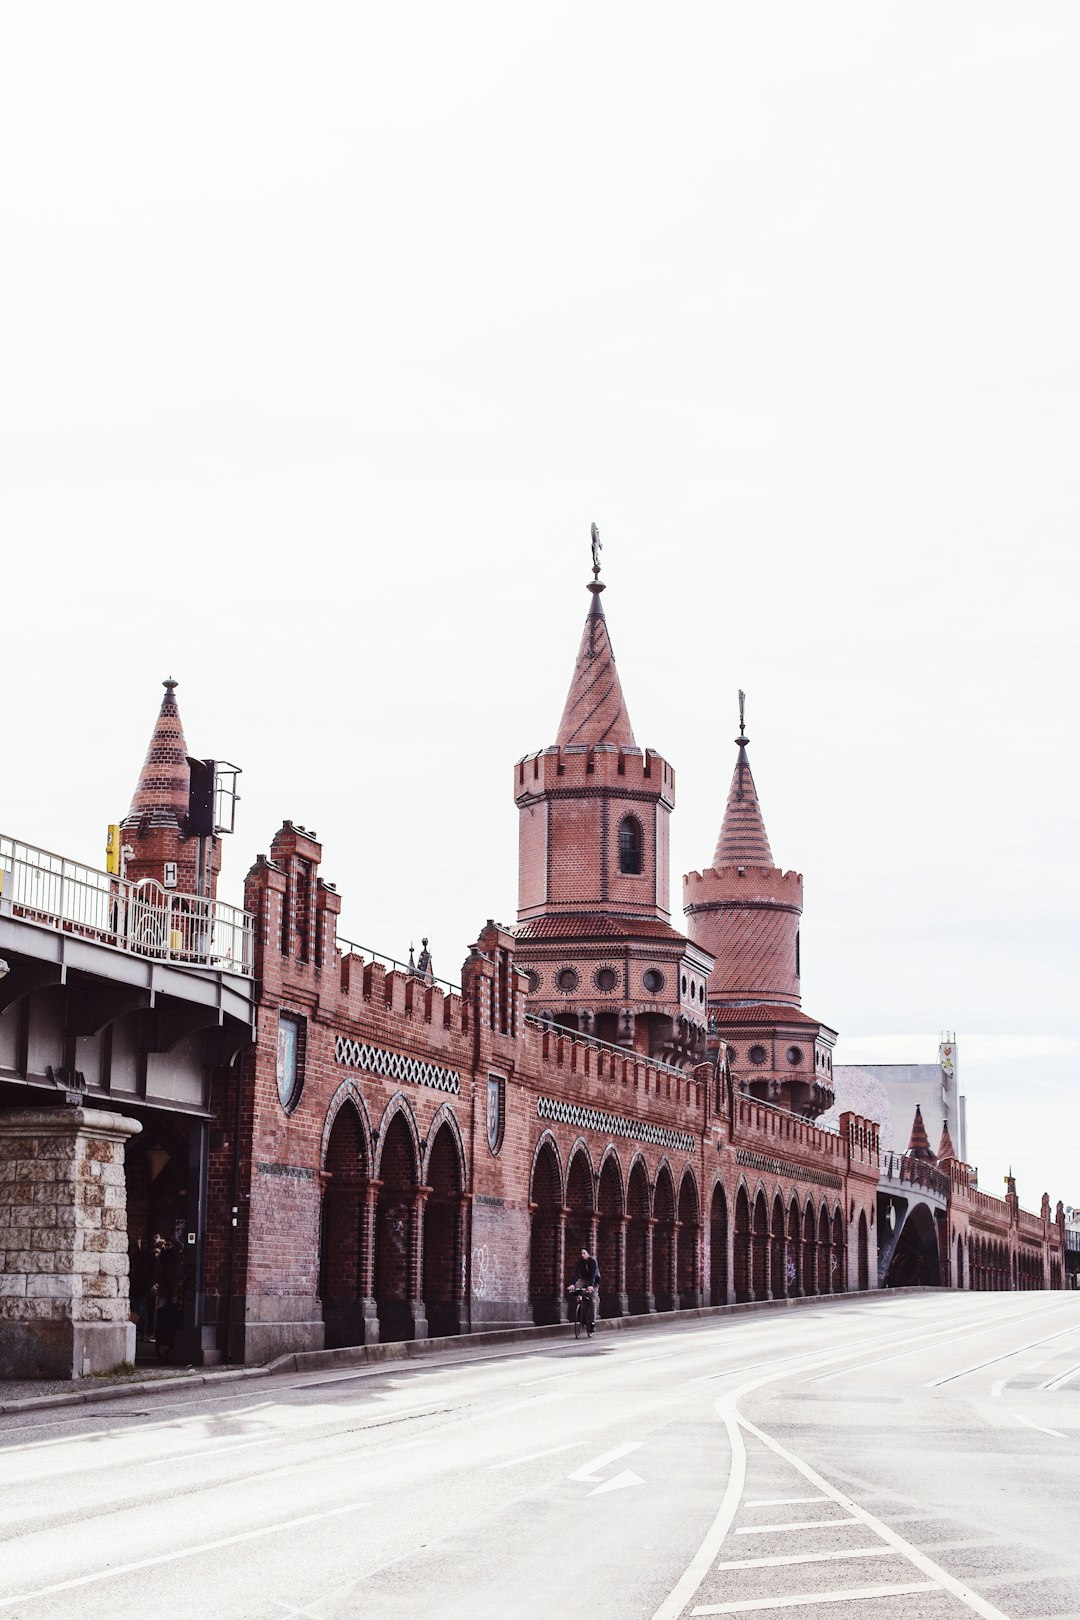 Travel Tips and Stories of Oberbaum Bridge in Germany